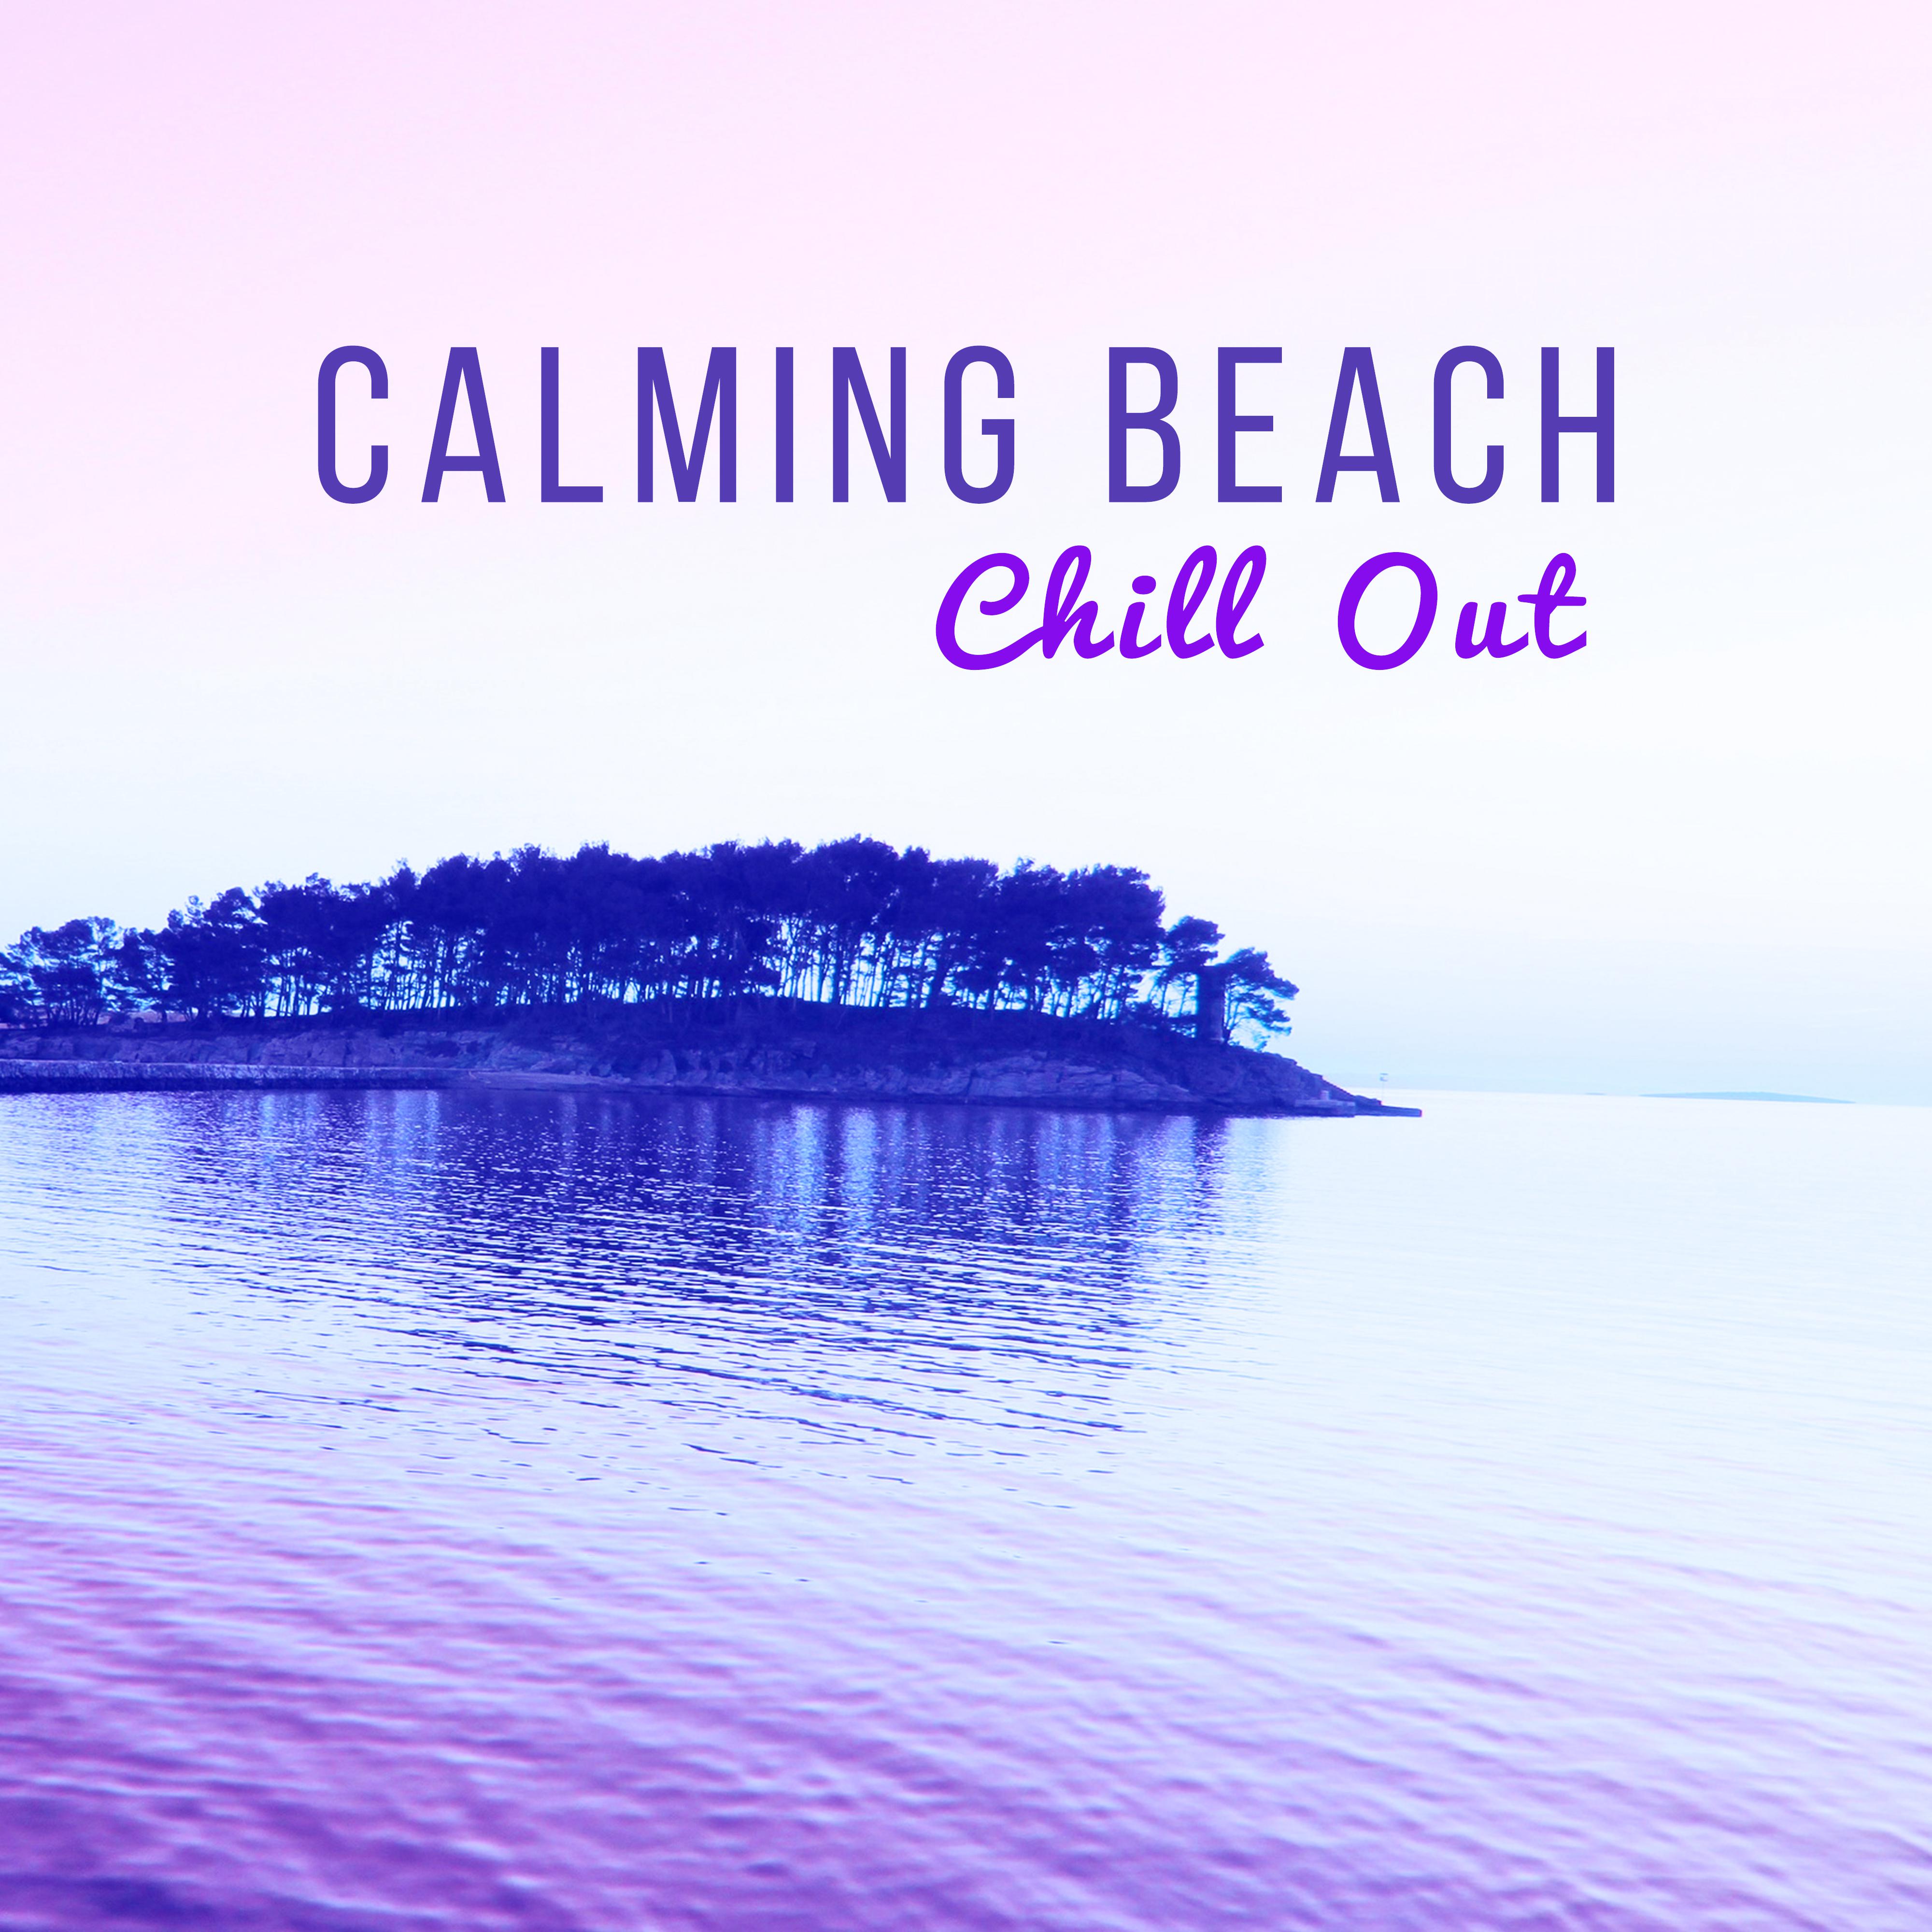 Calming Beach Chill Out – Summer Hot Vibes, Relaxing Chill Out, Beach House Lounge, Tropical Sounds